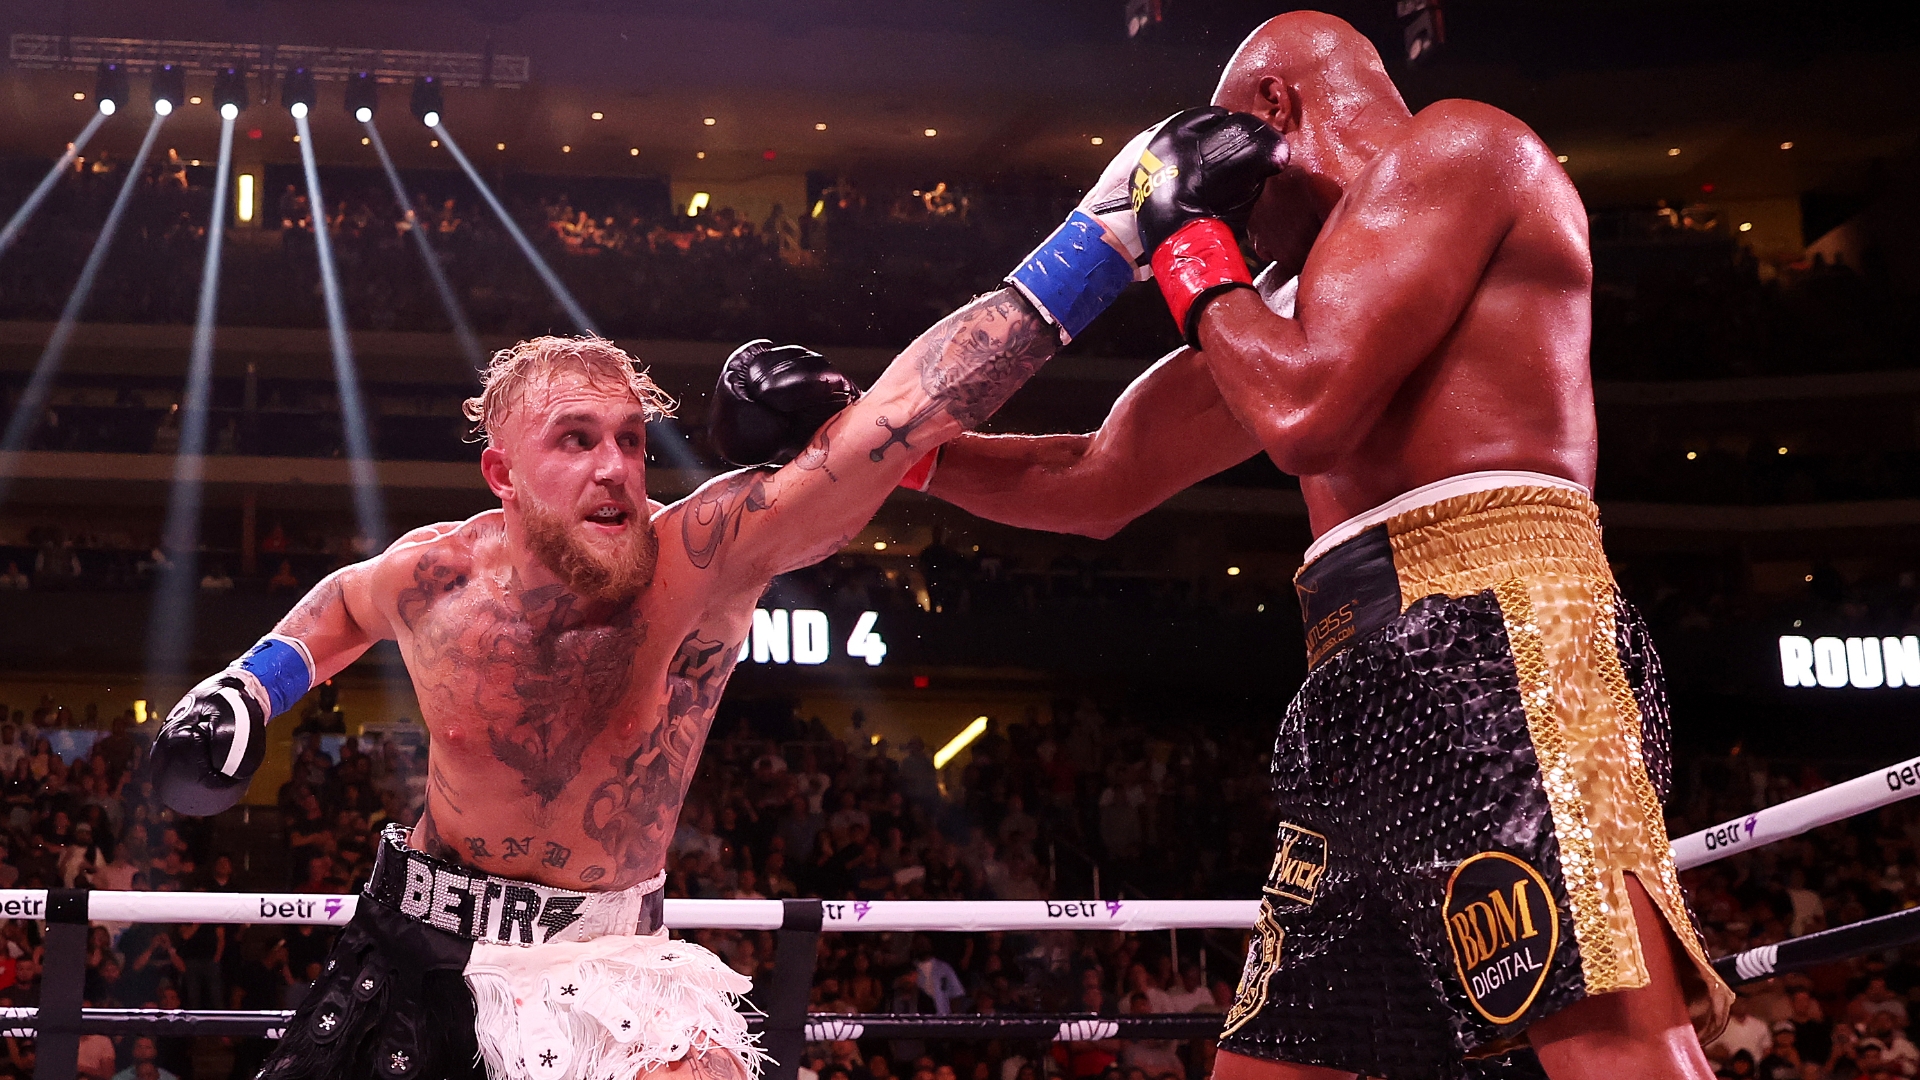 Jake Paul claims unanimous-decision victory over MMA legend Anderson Silva - Stream the Video